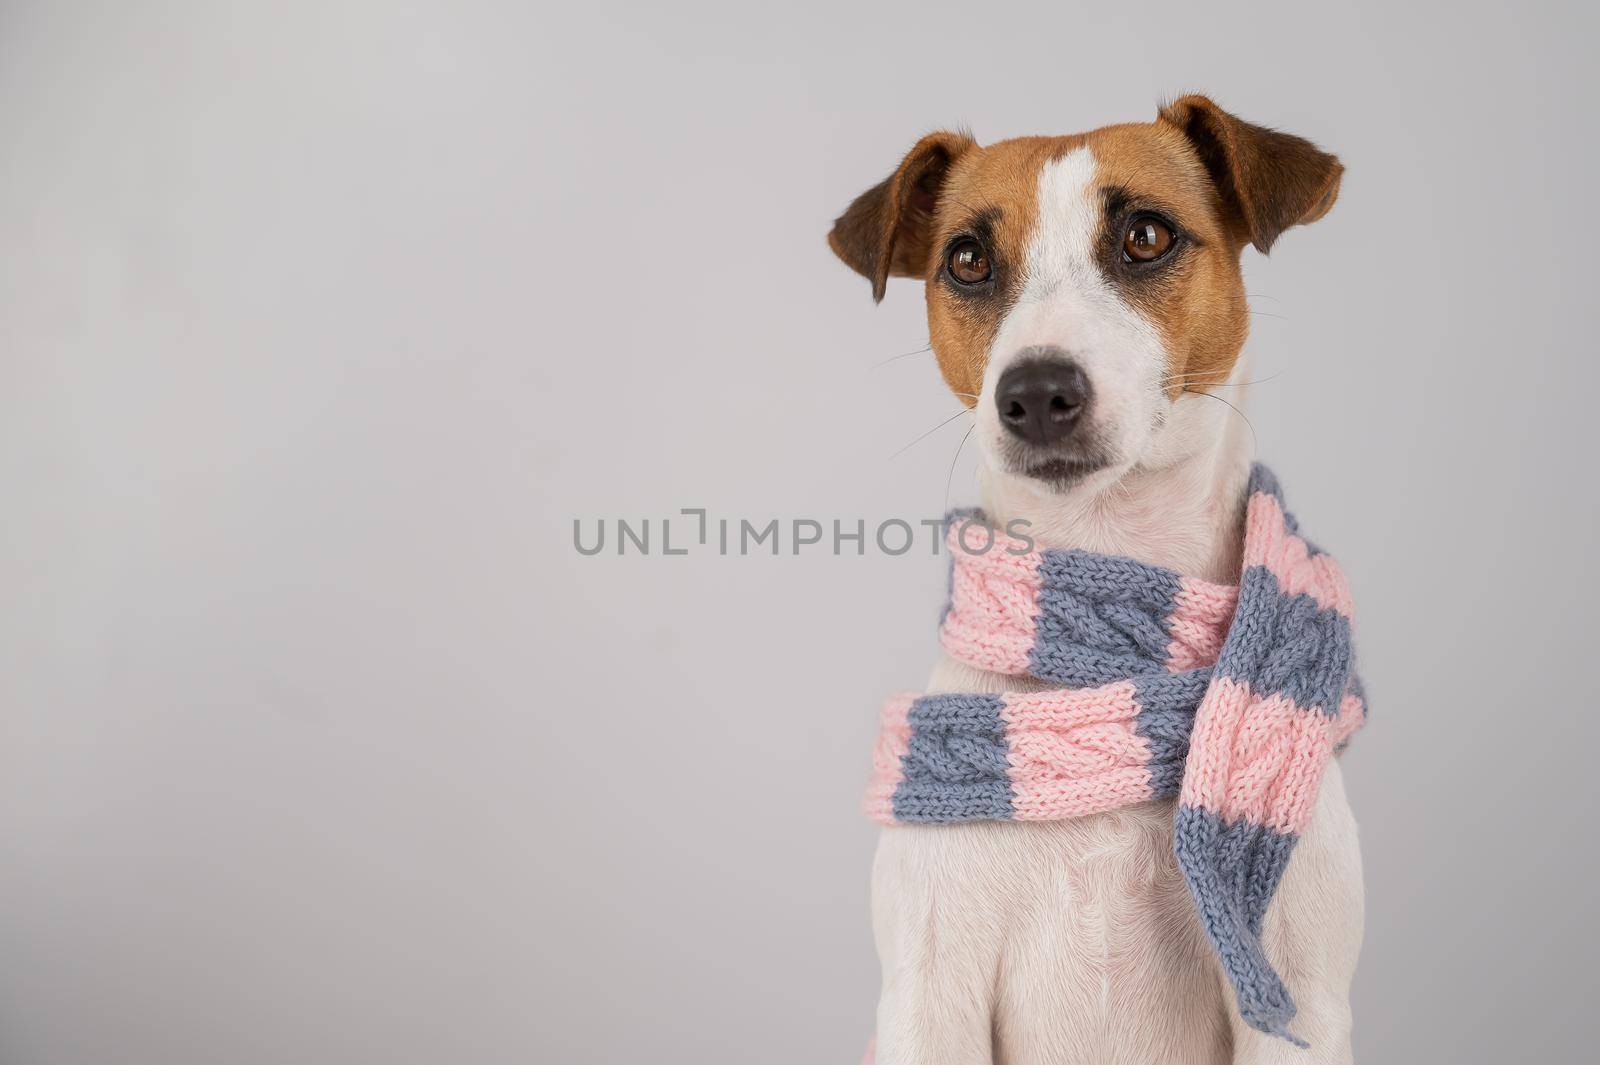 Dog Jack Russell Terrier wearing a knit scarf on a white background. by mrwed54